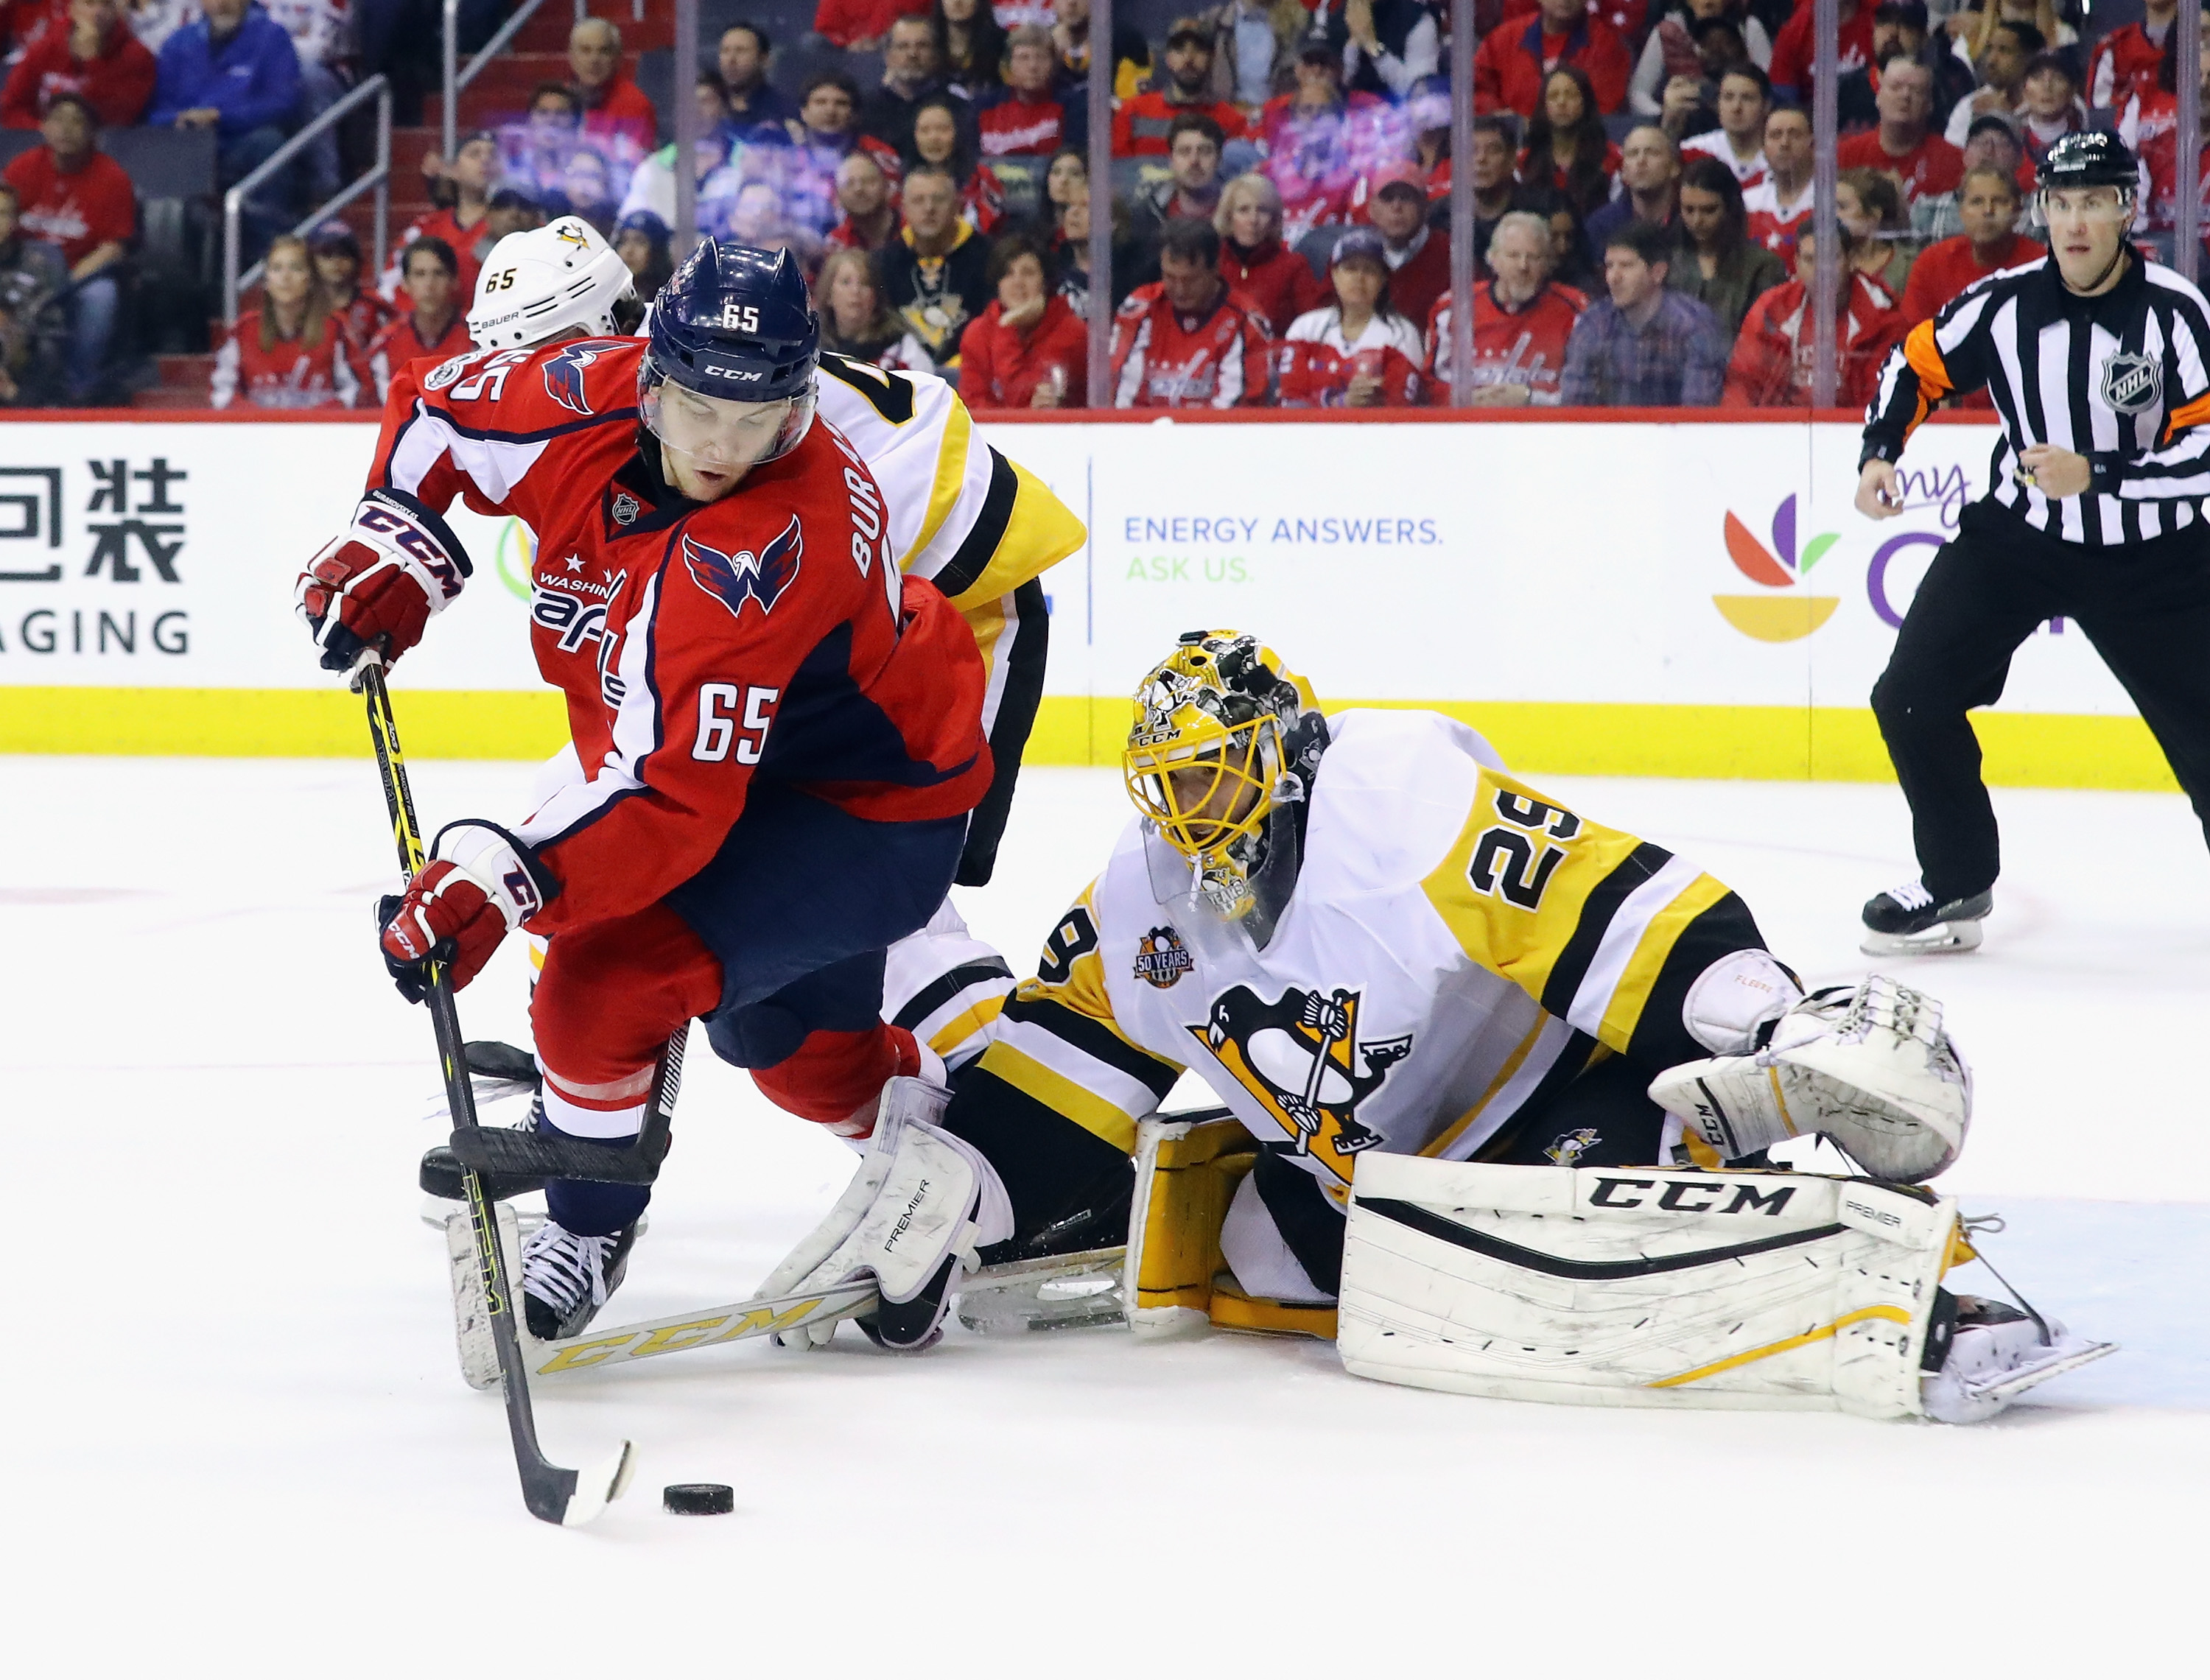 Pittsburgh Penguins Building a Dynasty Through Trades and Draft Picks